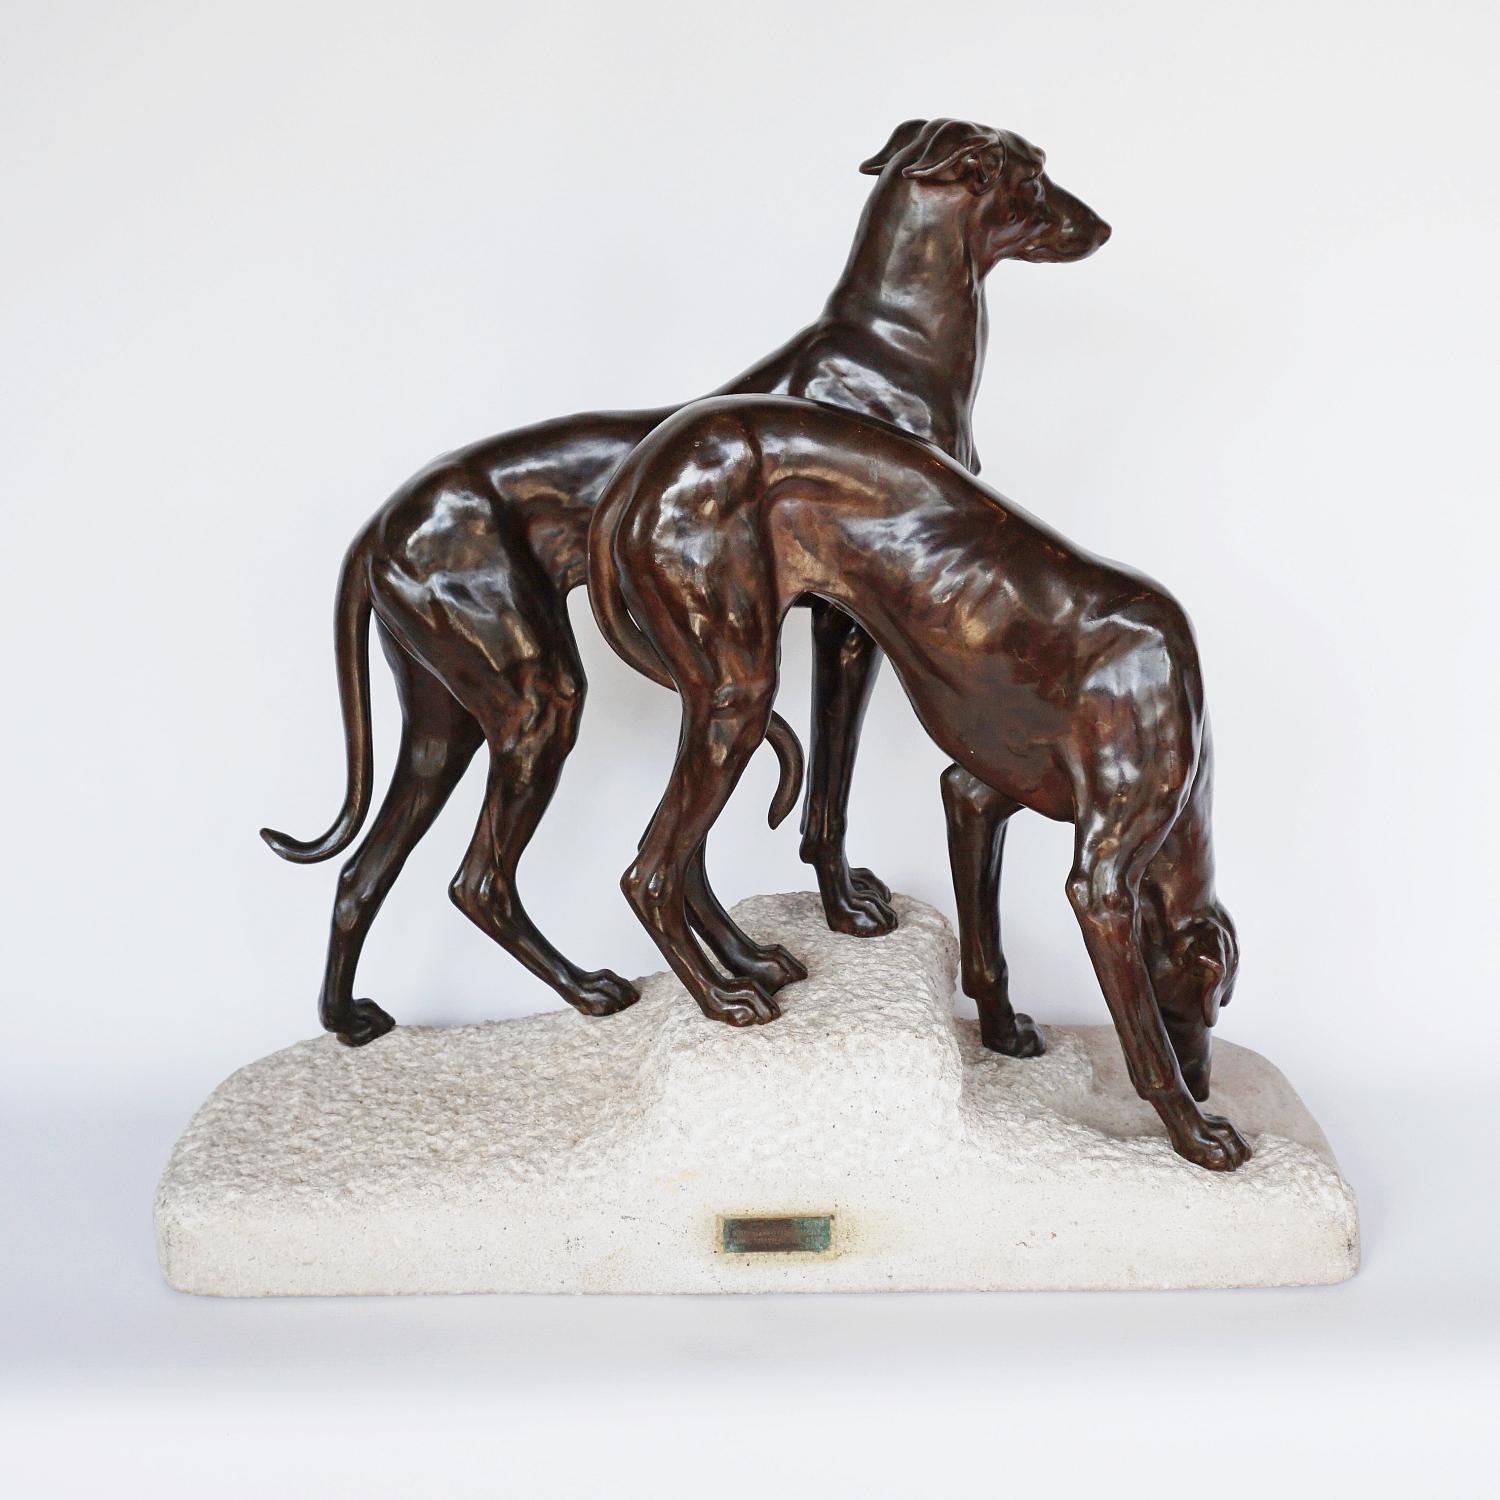 An Art Deco sculpture group by Jules-Edmund Masson (1871-1932) depicting two Greyhounds on a rocky base, the female drinking from a small pool whilst the male dog stands erect. White art metal with a bronze patinated finish. Set over a limestone